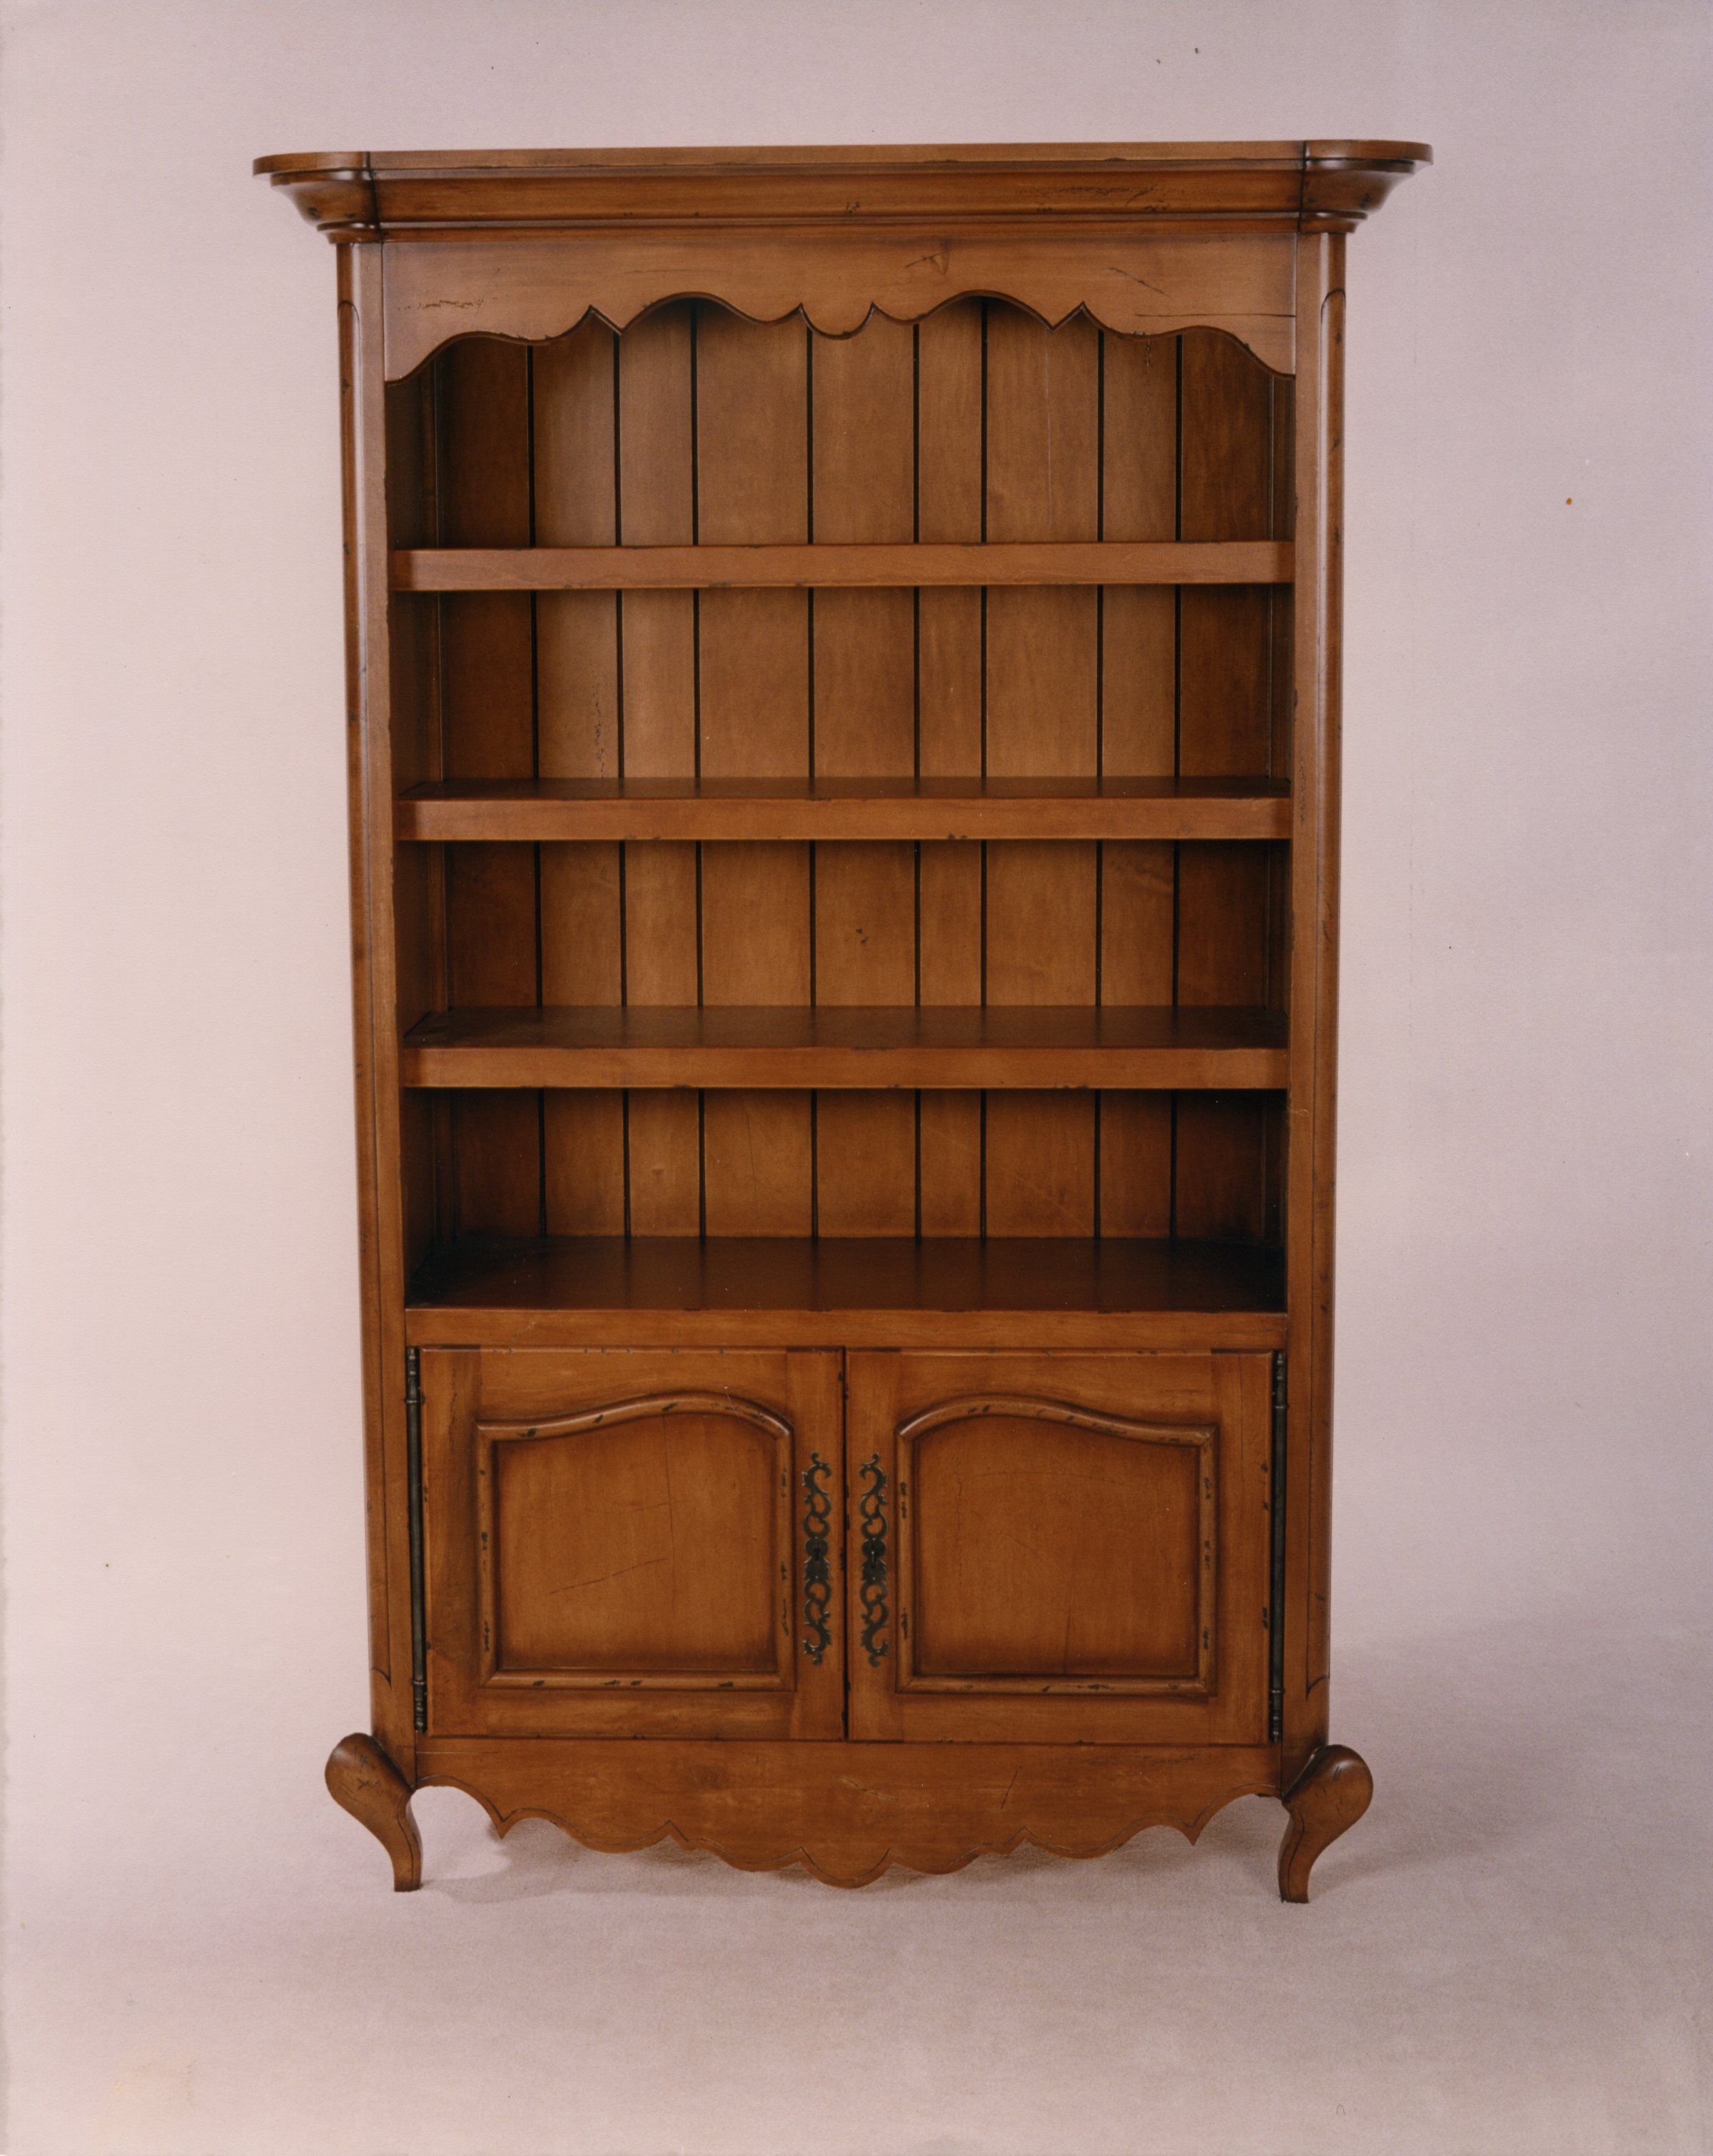  French Country Bookcase for Small Space